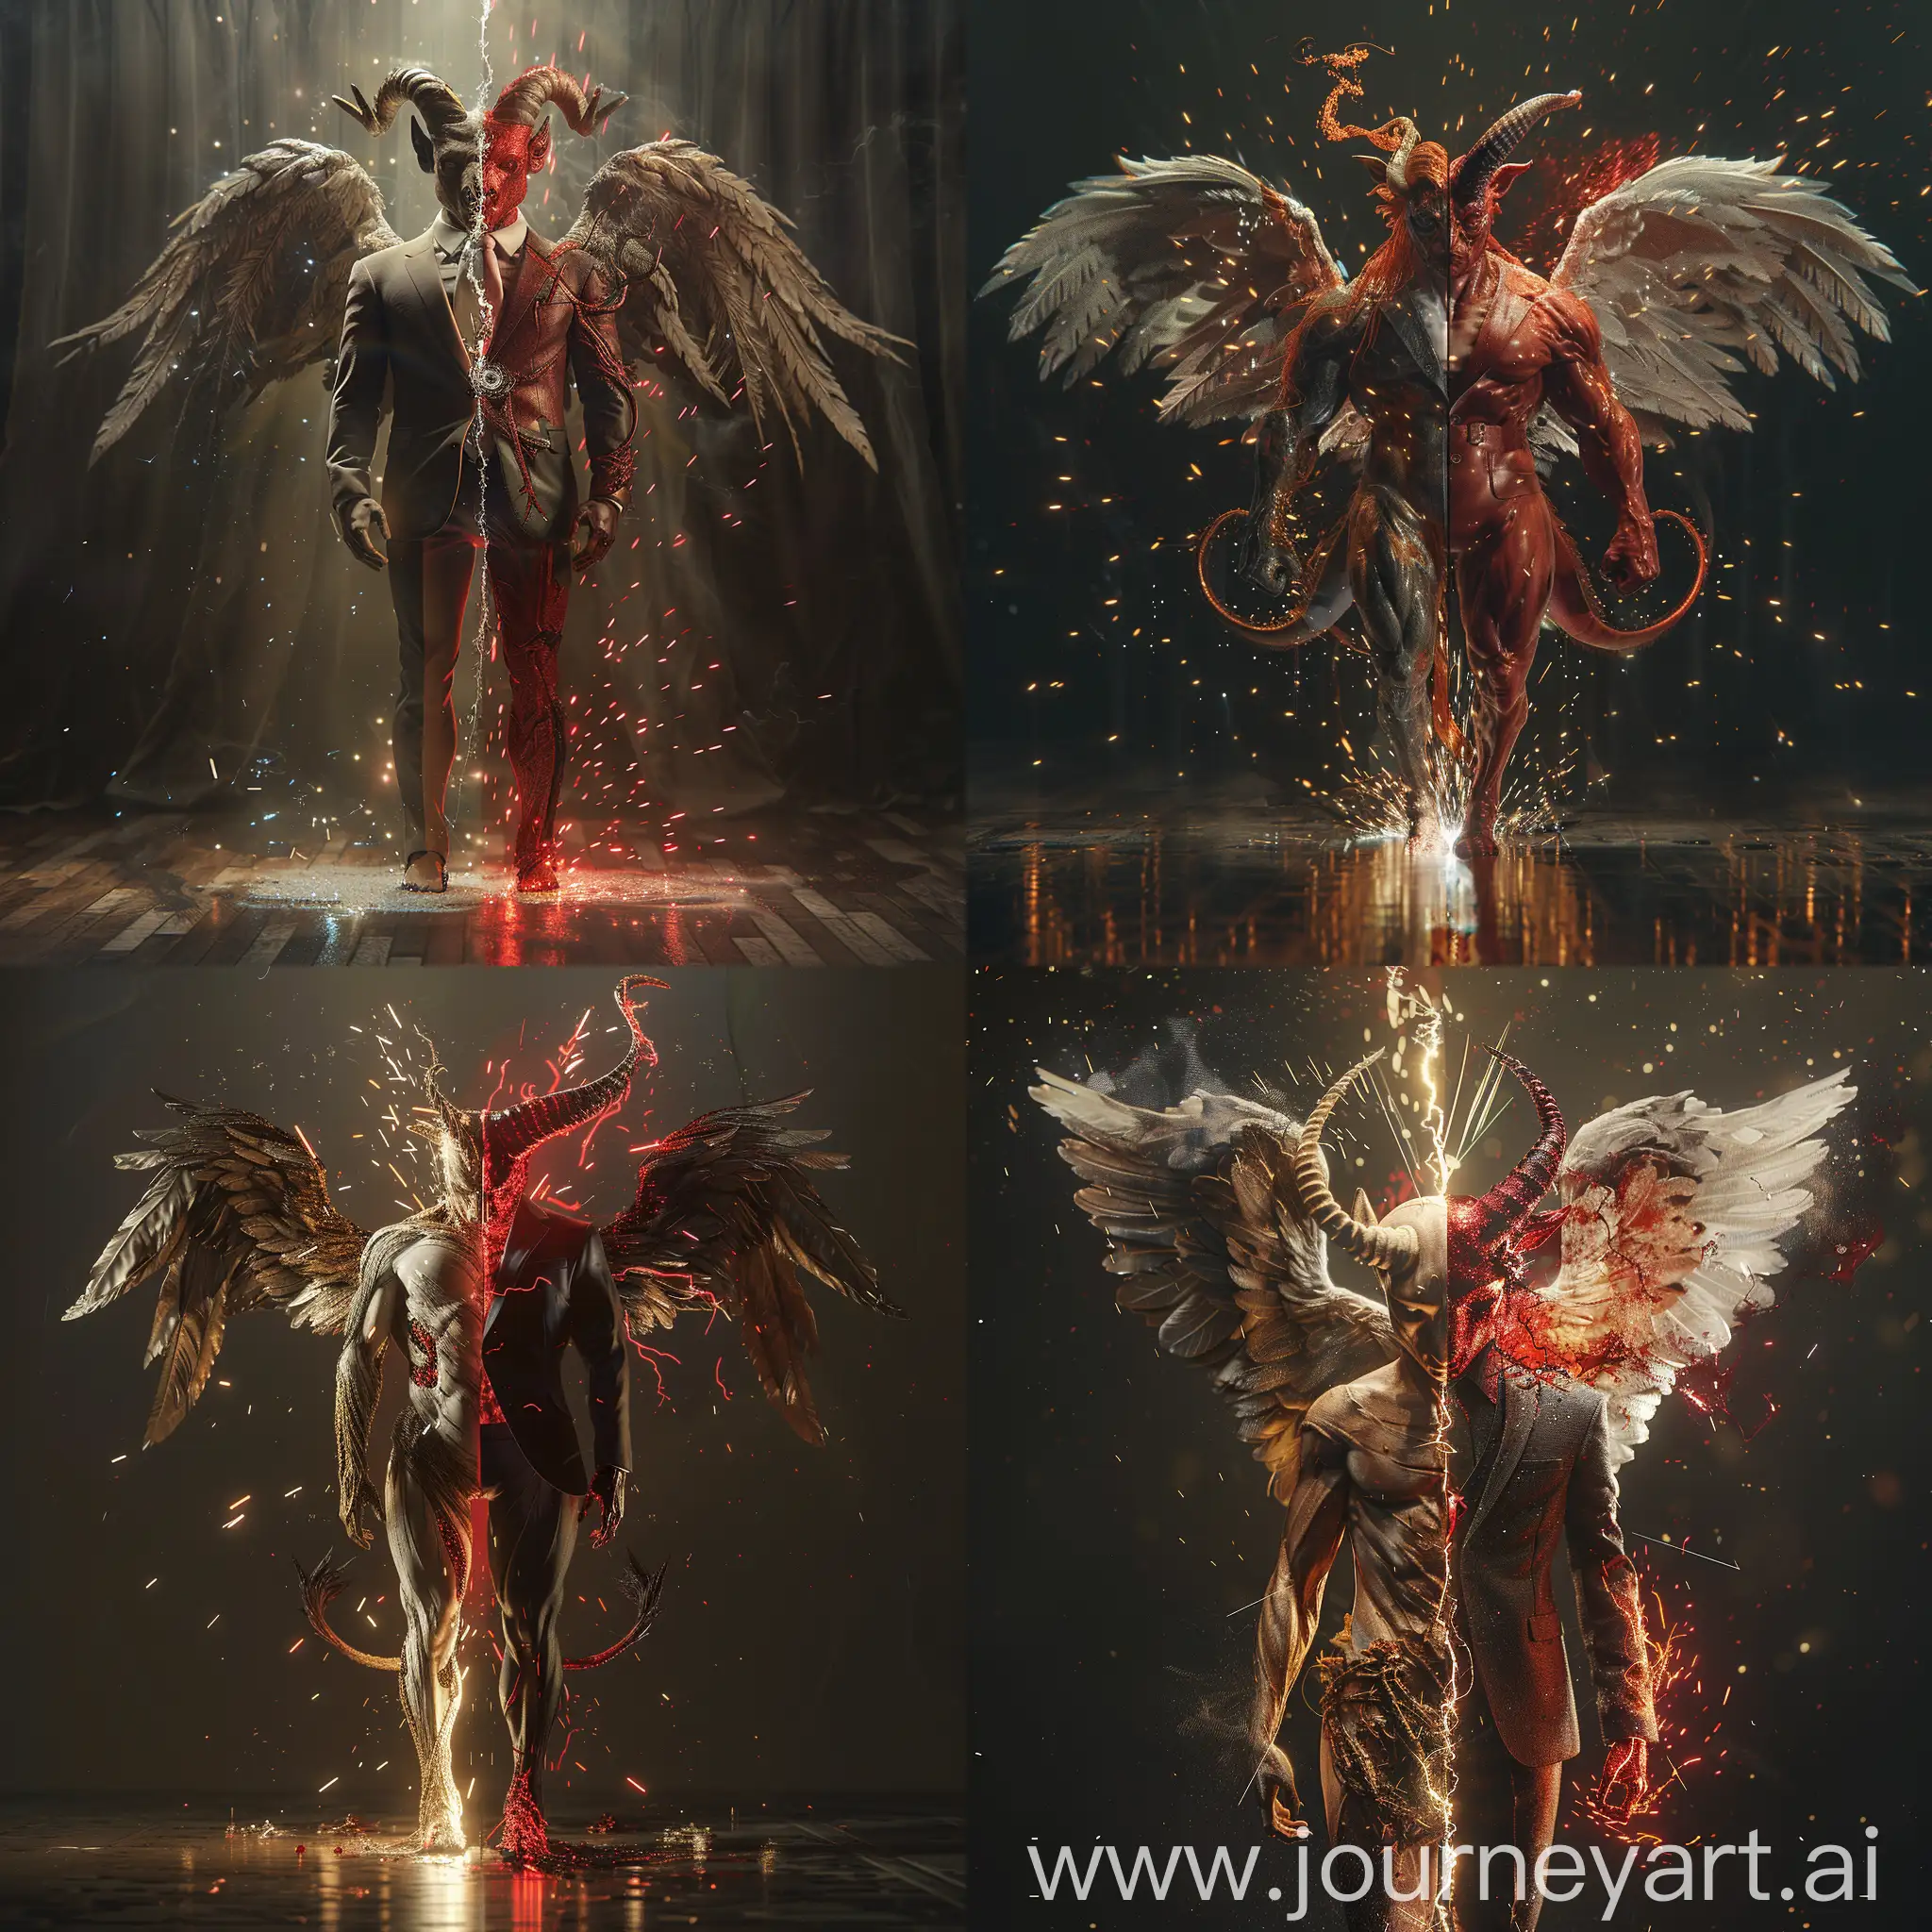  16k Hyperrealistic detailed sharp 3d digital illustration full body of a centaur split into two parts. One part an angel with wings, one part a red devil in a suit, dark art. Gorgeously backlit, magic sparks. brushstrokes by Carne Griffiths, C215, Robert Oxley. CGI by Ricardo Salamanca. ZBrush, Octane Render, Unreal Engine 5 render--stylize 750 --v 6